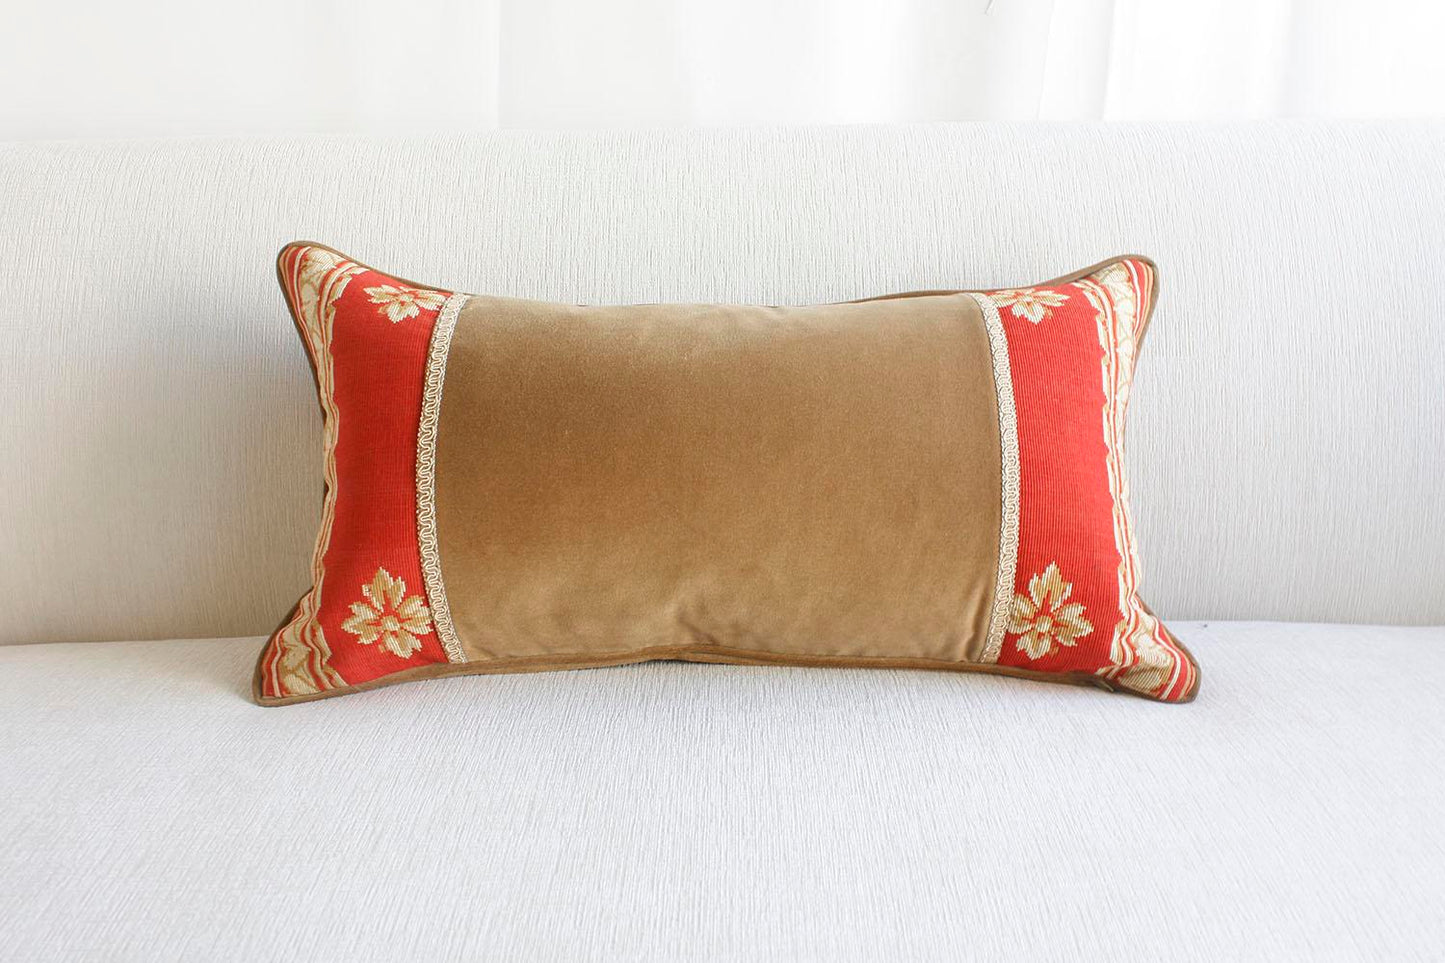 Single Neoclassical-style Pillow